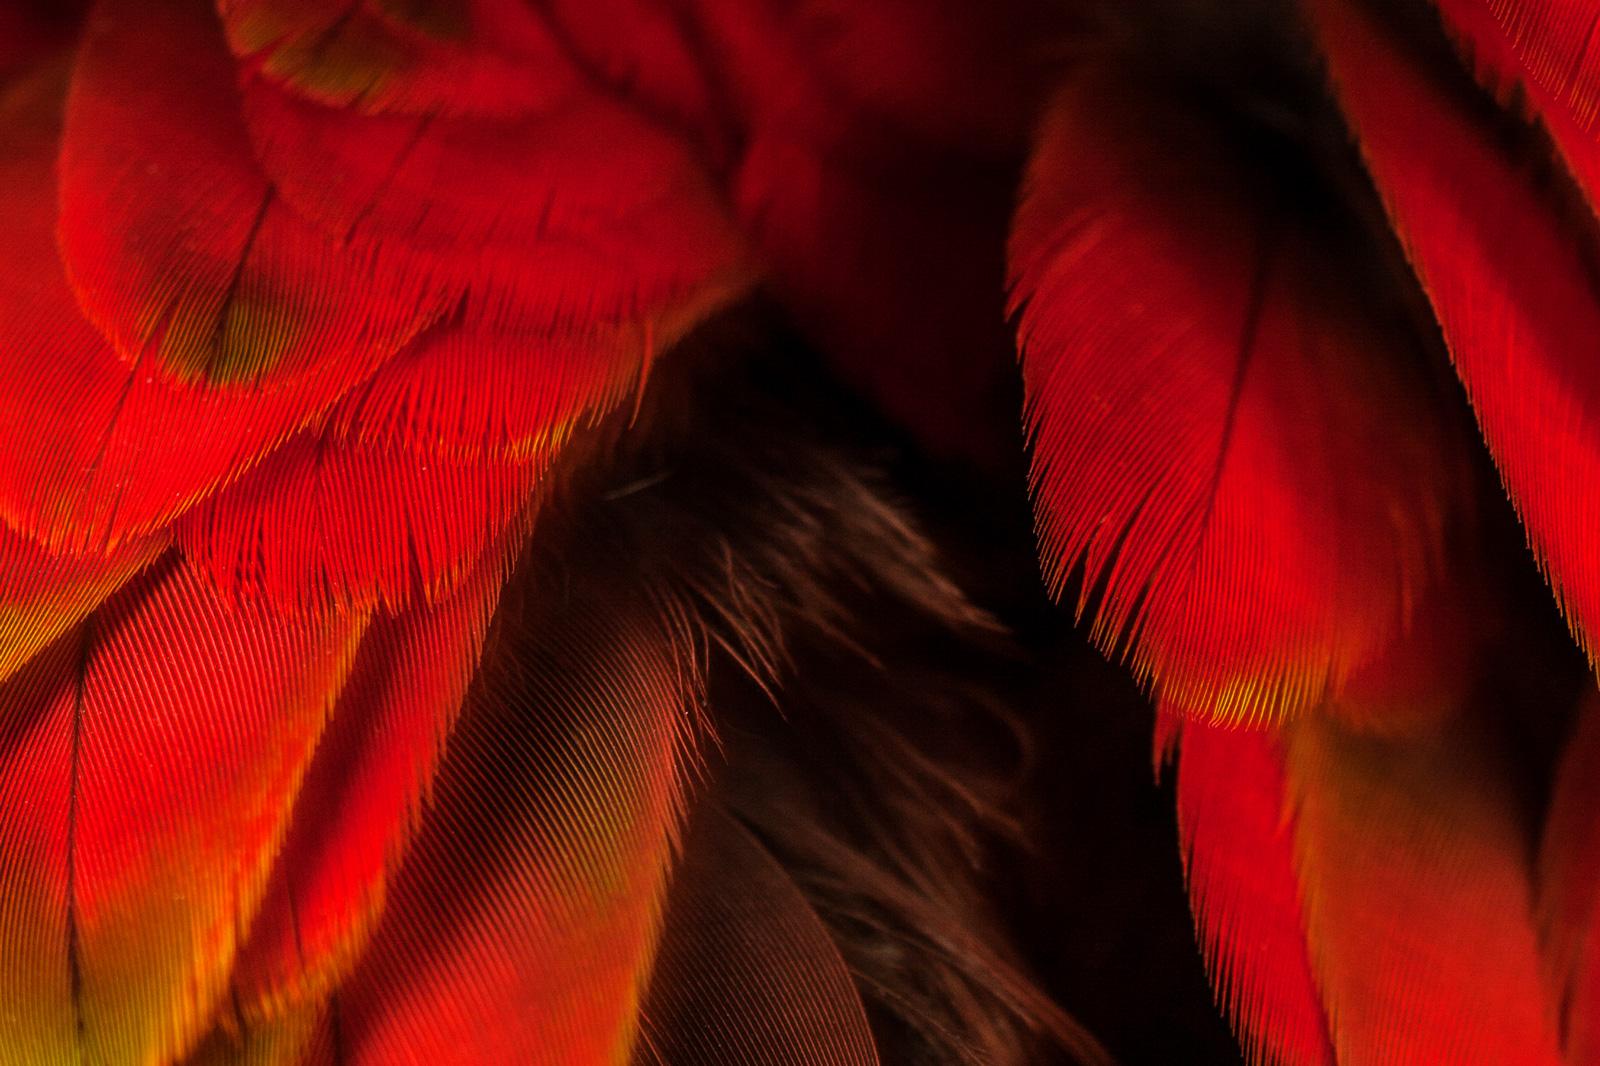 Macaw #5 - Animal signed limited edition contemporary fine art print, Bird, Red - Photograph by Tim Platt